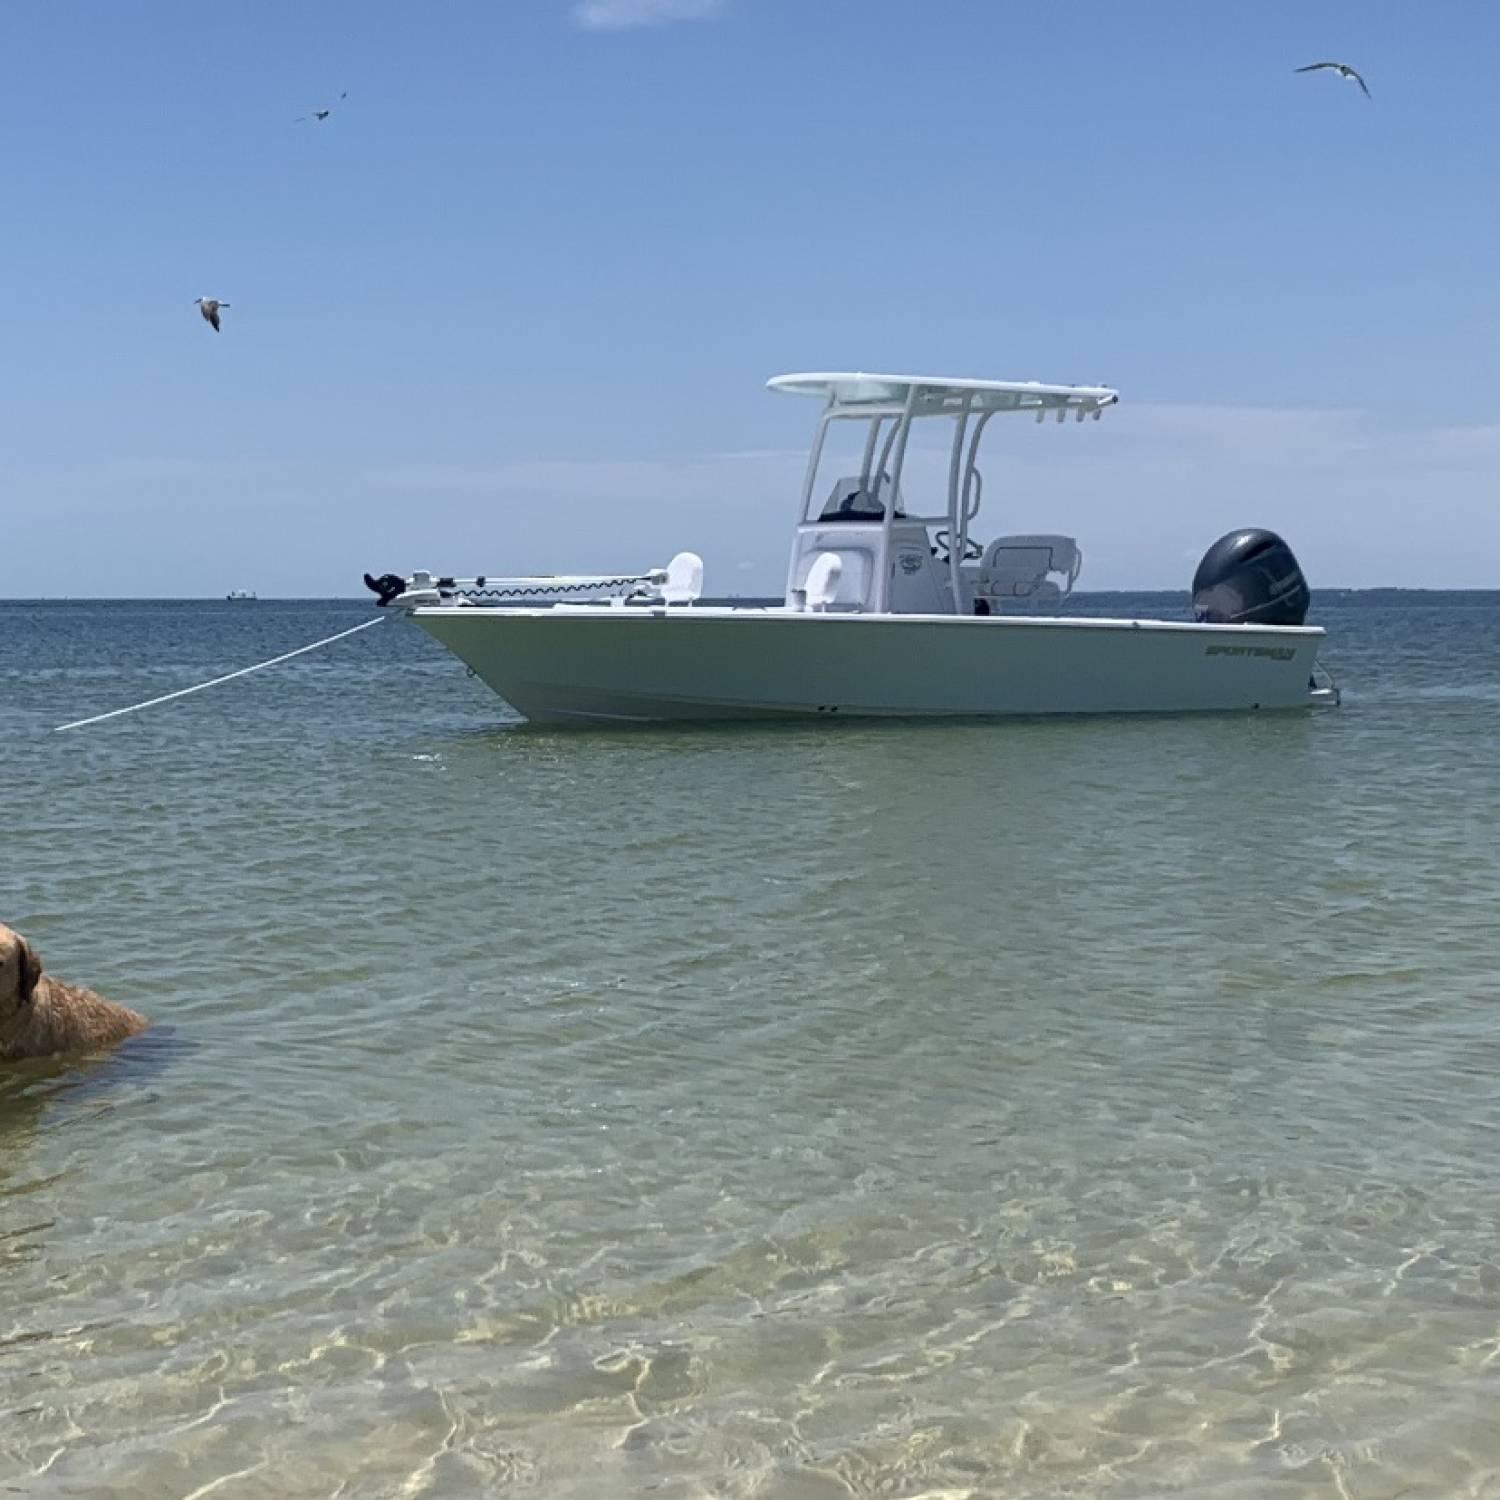 Title: First Weekend Out on the Water! - On board their Sportsman Masters 227 Bay Boat - Location: Dog Island, FL. Participating in the Photo Contest #SportsmanJune